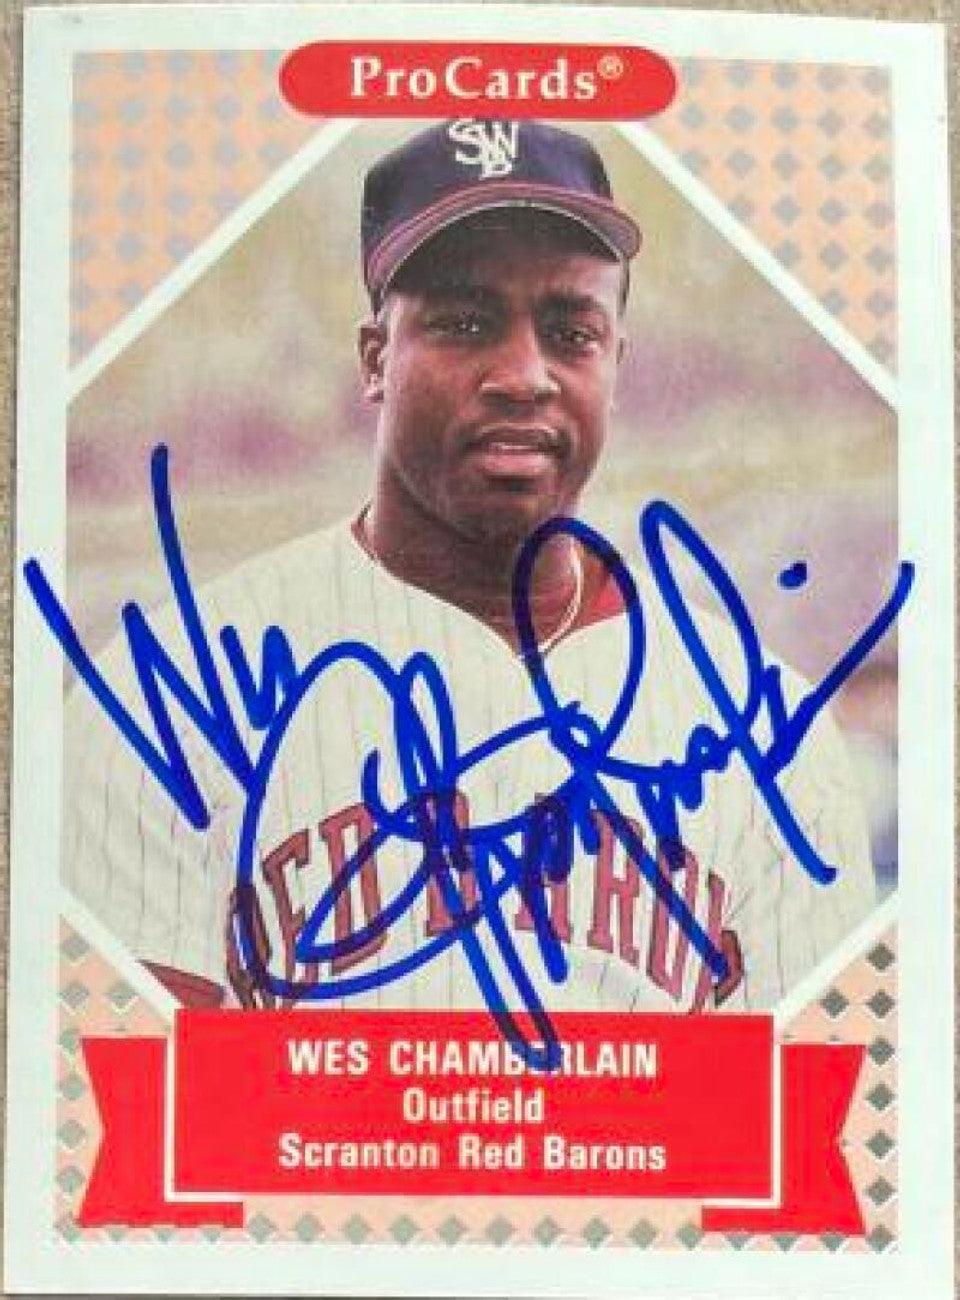 Wes Chamberlain Signed 1991-92 ProCards Tomorrow's Heroes Baseball Card - Scranton Red Barons - PastPros